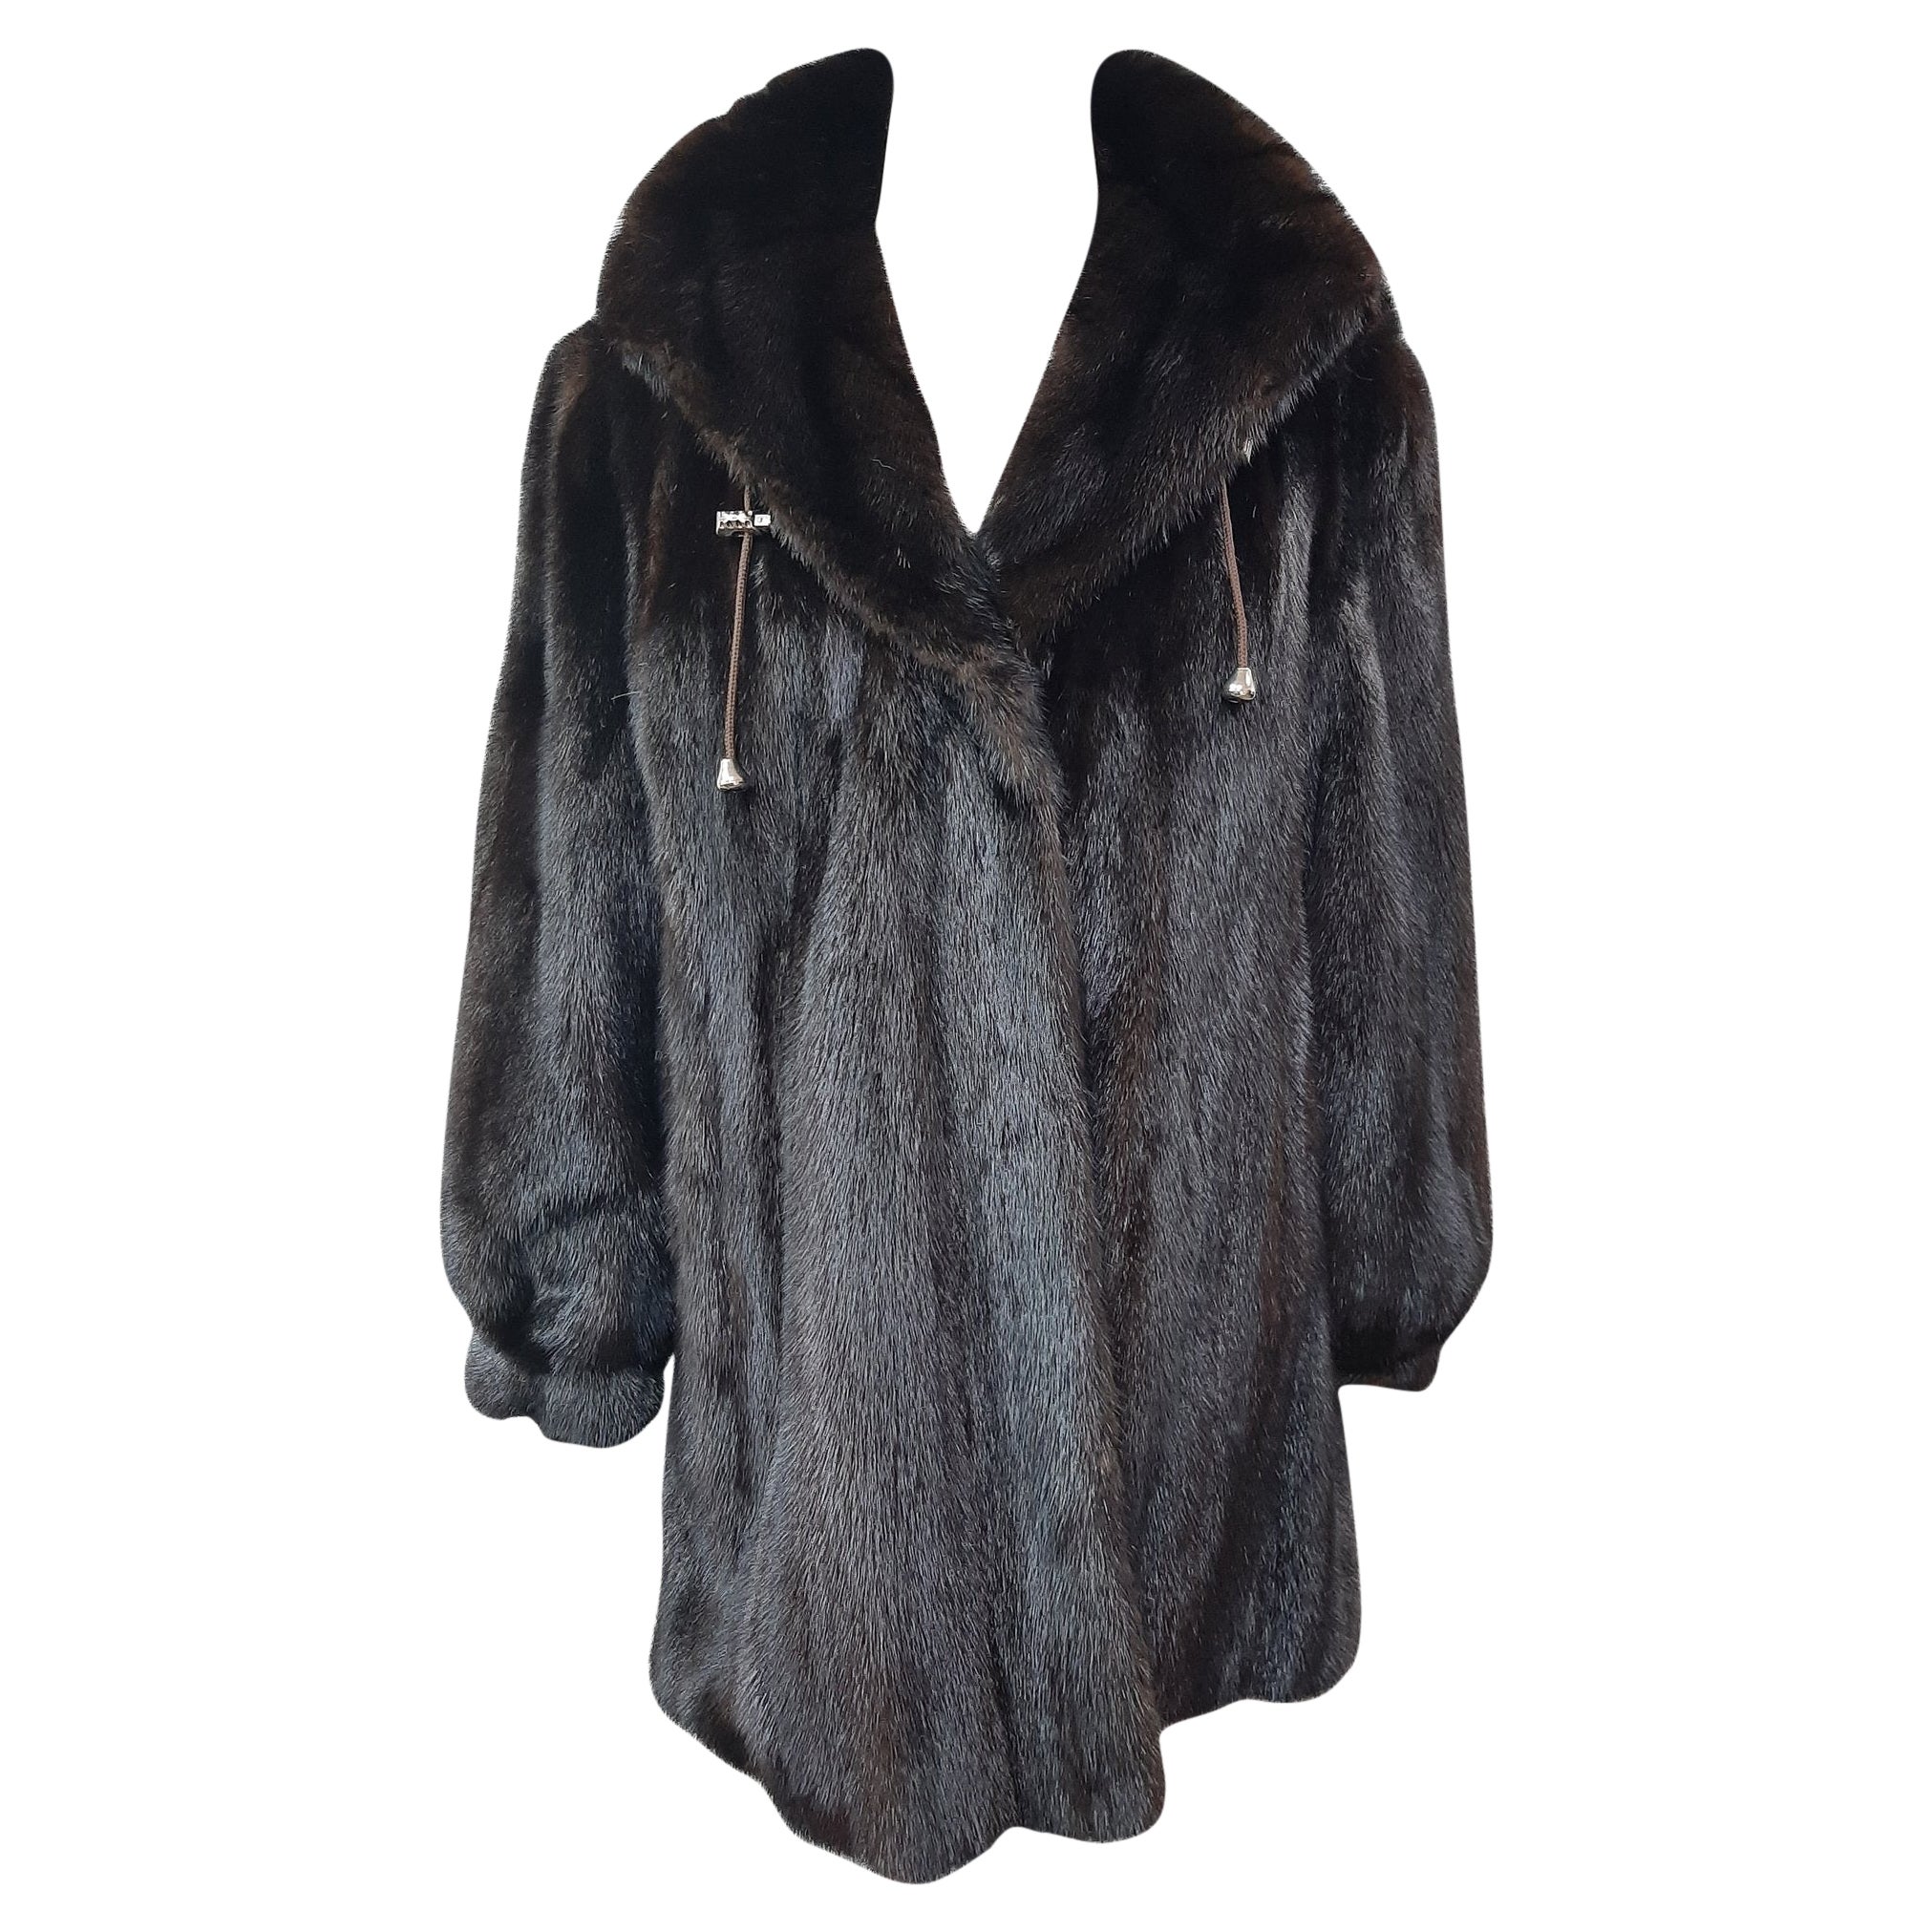 Unused ranch mink fur coat with a hood size 16 For Sale